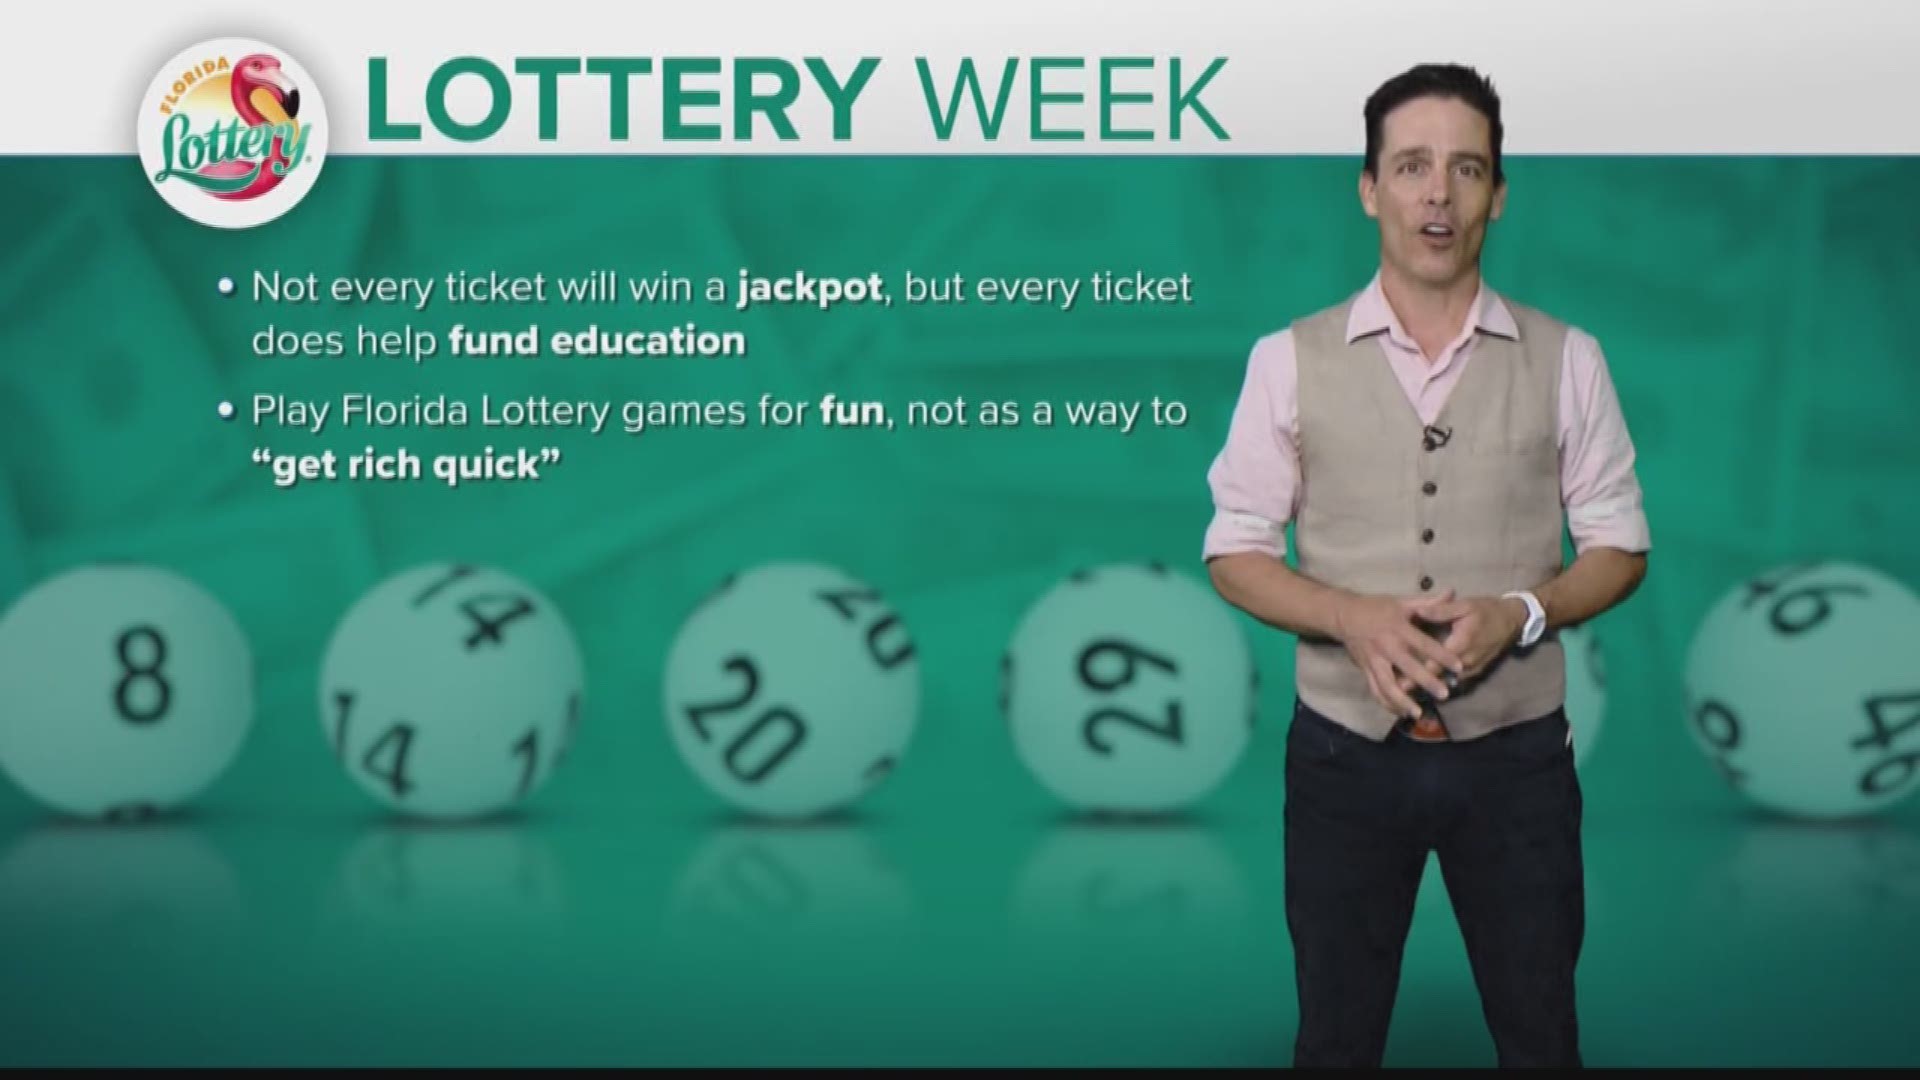 It's not too late to have fun and celebrate National Lottery Week in Florida!